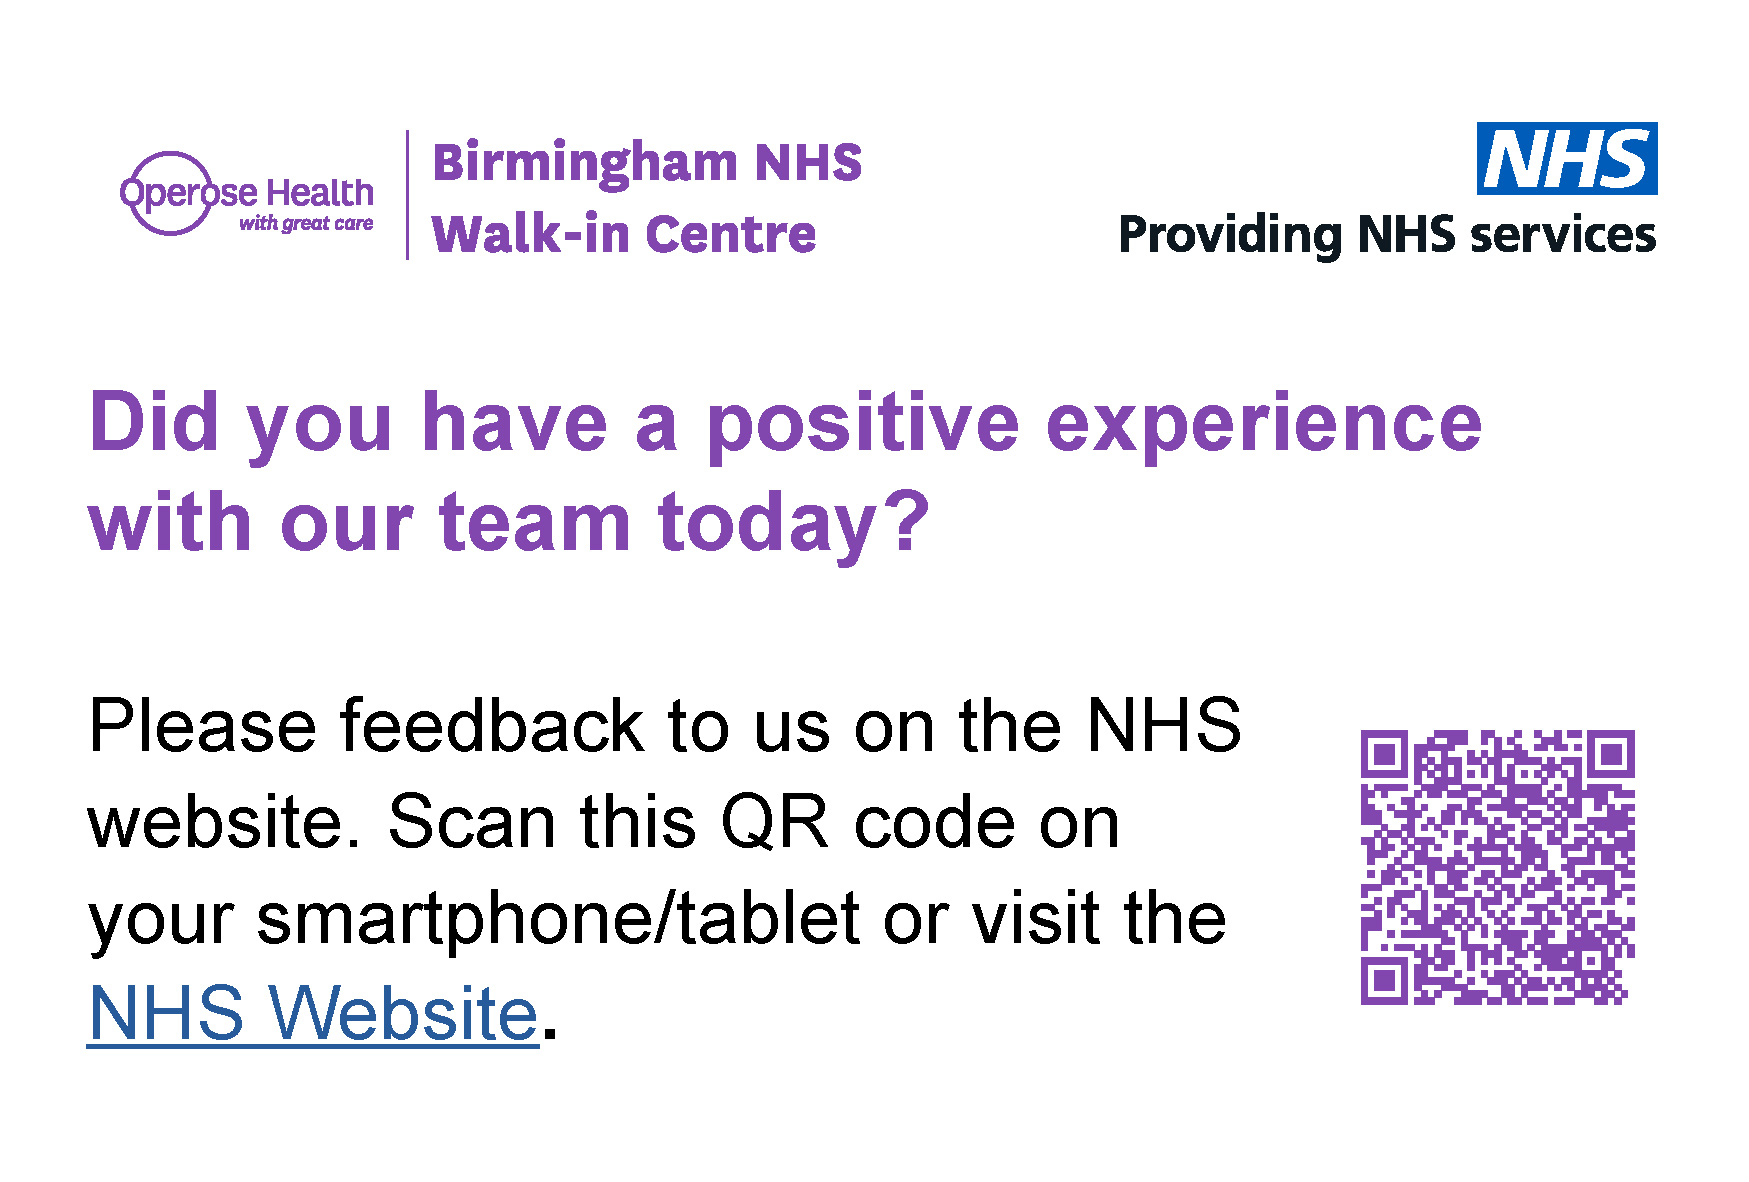 Banner - Did you have a positive experience with our team today? Leave us a review on the NHS website.